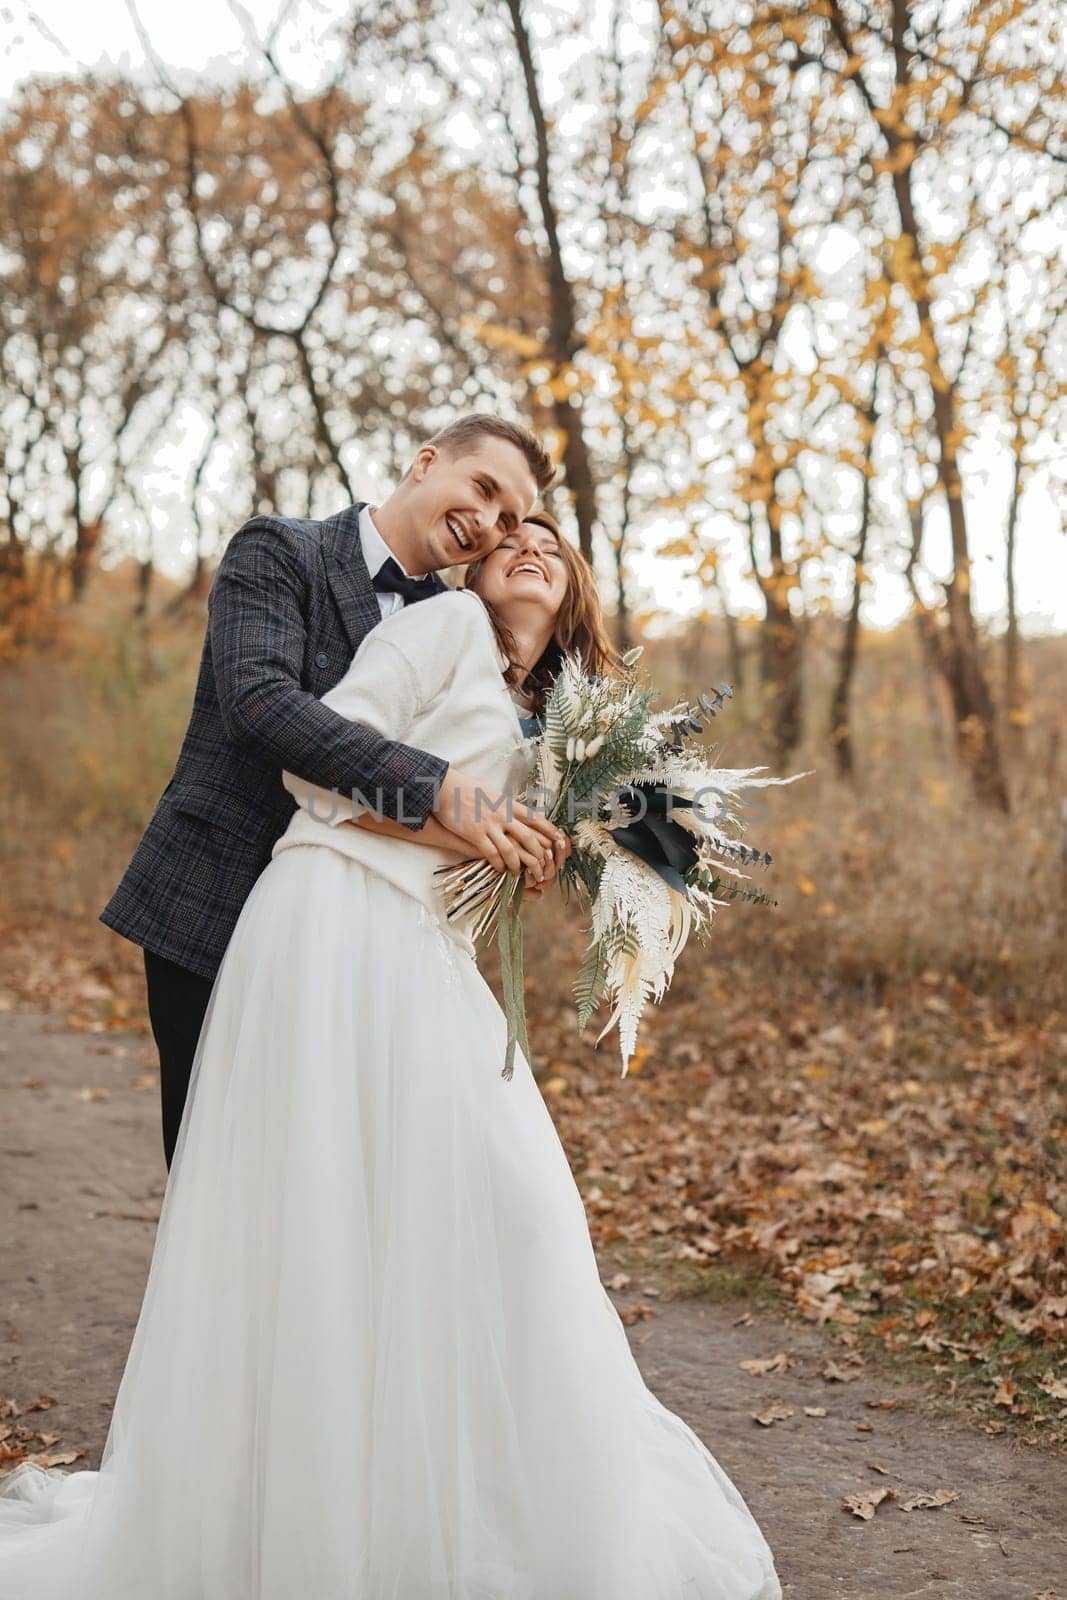 smiling bride and groom enjoying romantic moments outside in autumn